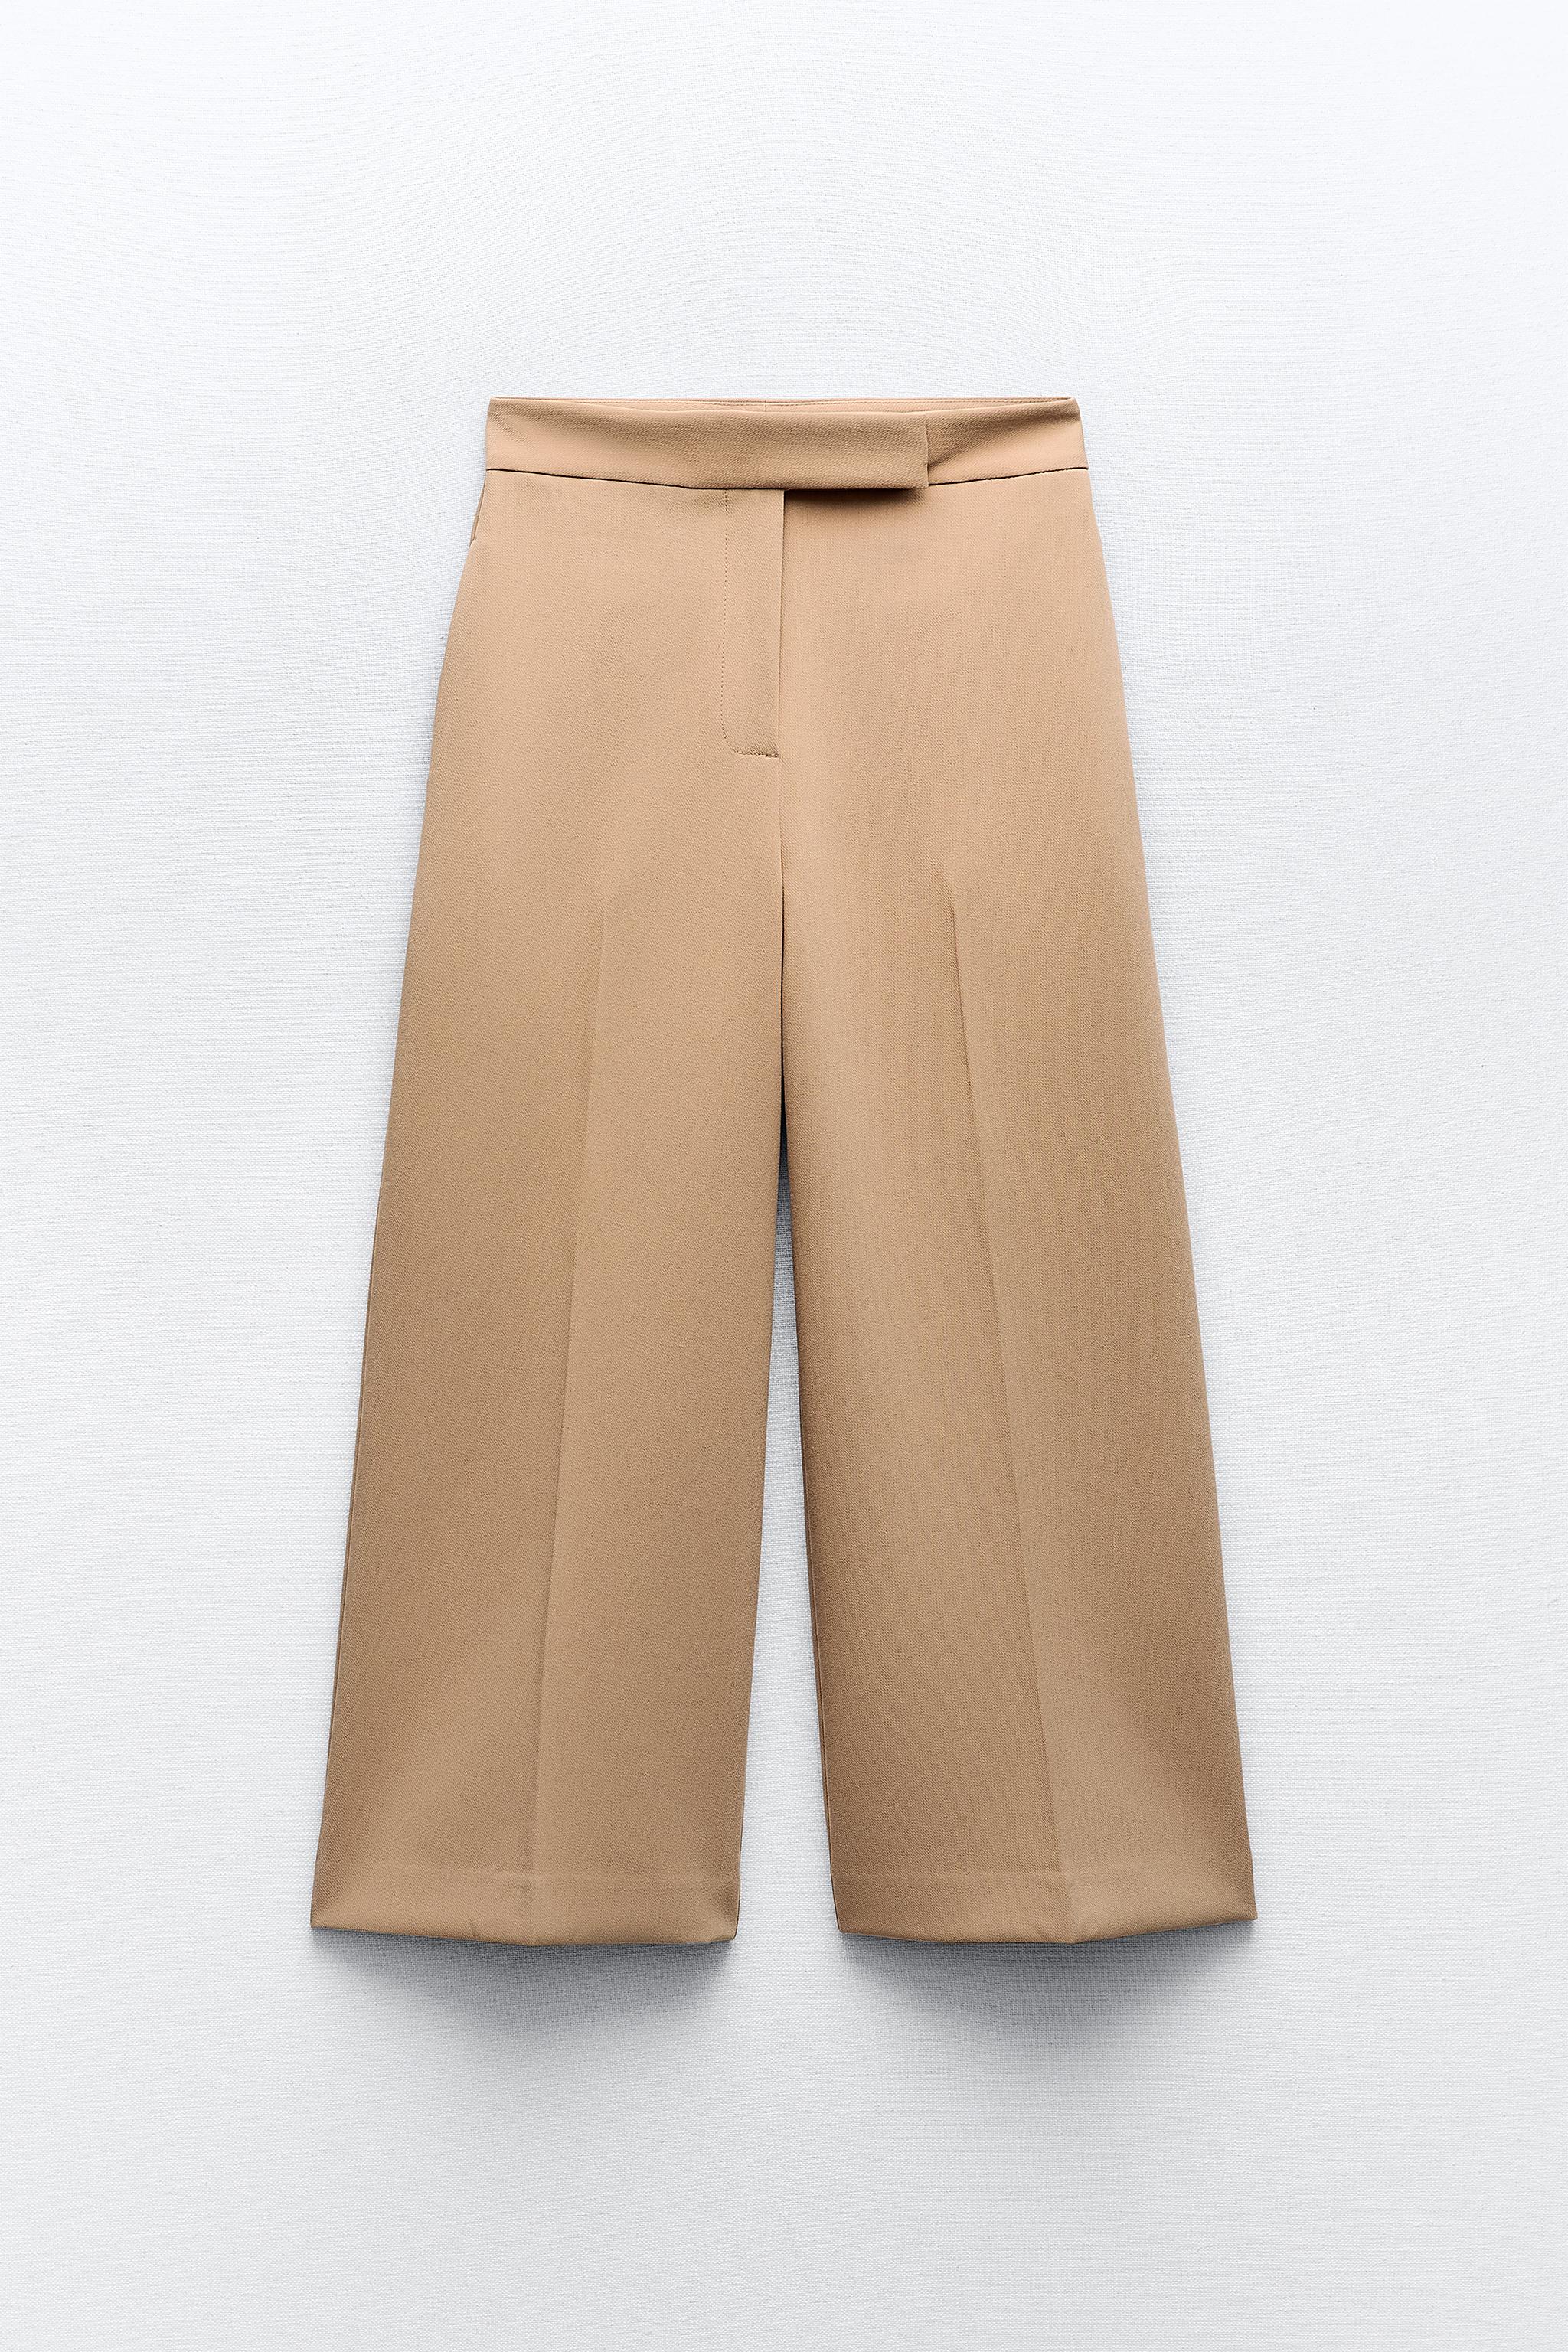 ZARA WOMENS HIGH Waist Cropped Pants Size Small Beige Taupe $35.00 -  PicClick